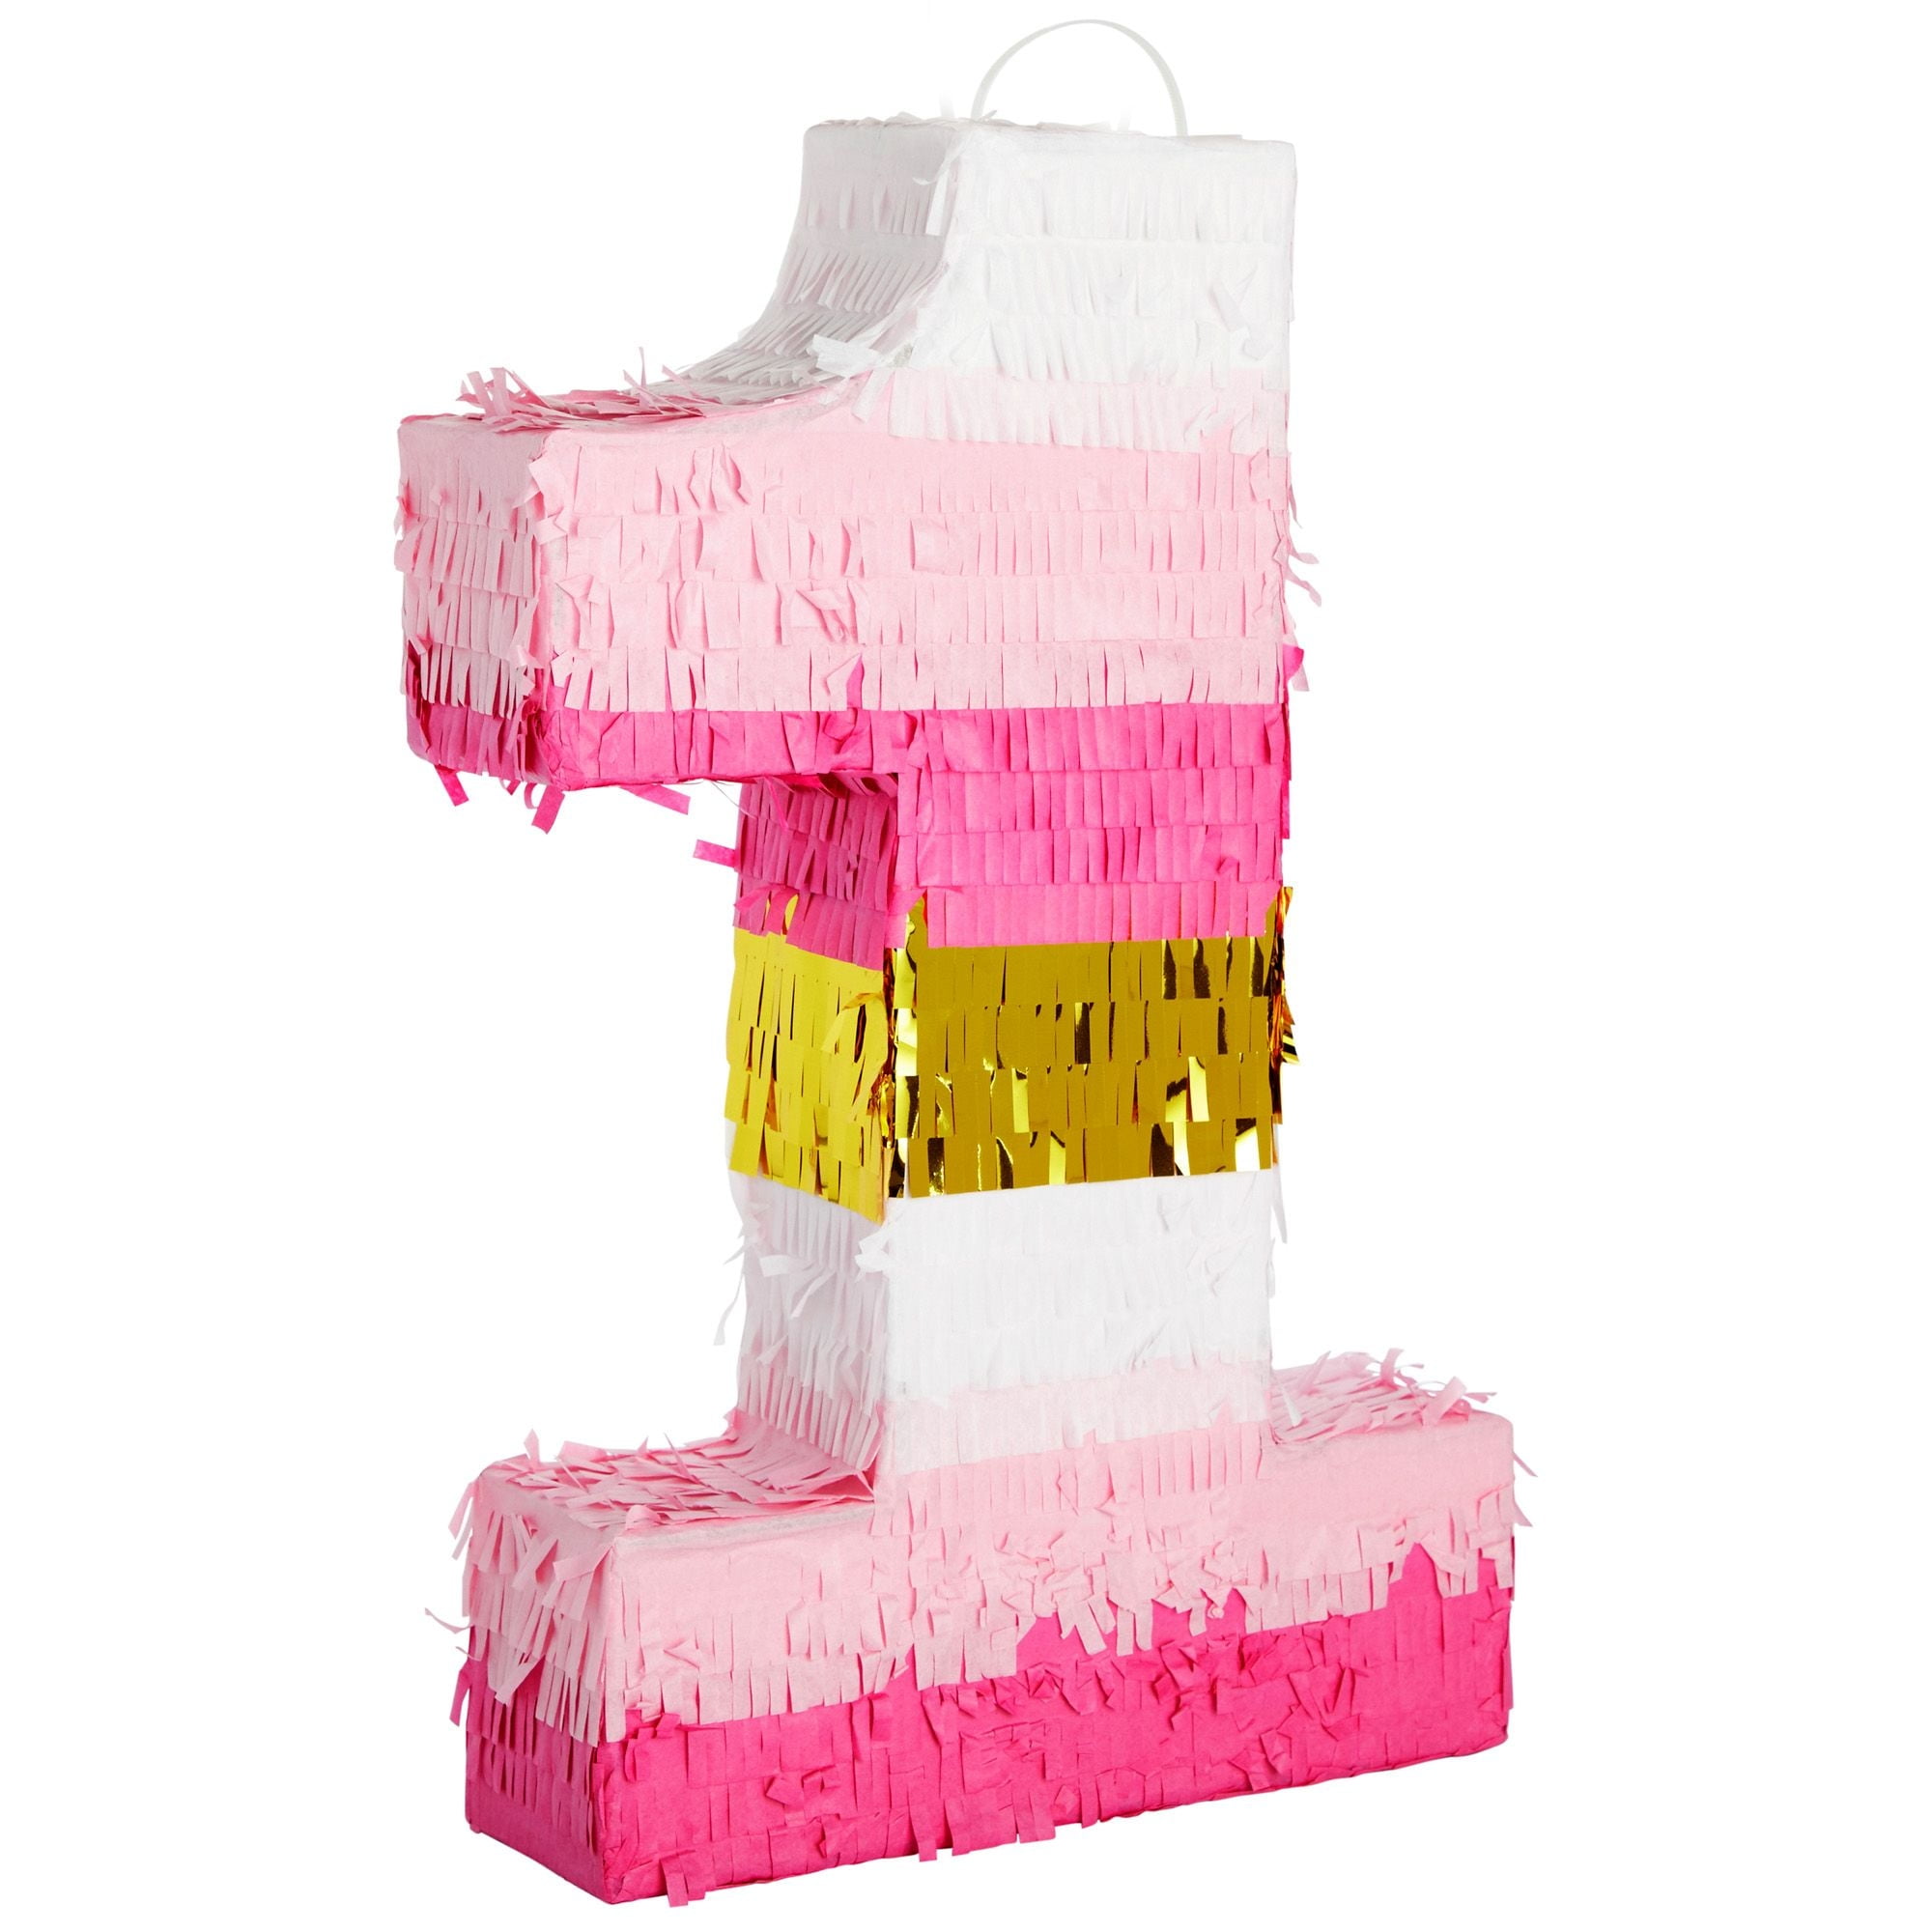 Number 1 Pinata, Pink and Gold for Girls 1st Birthday Party